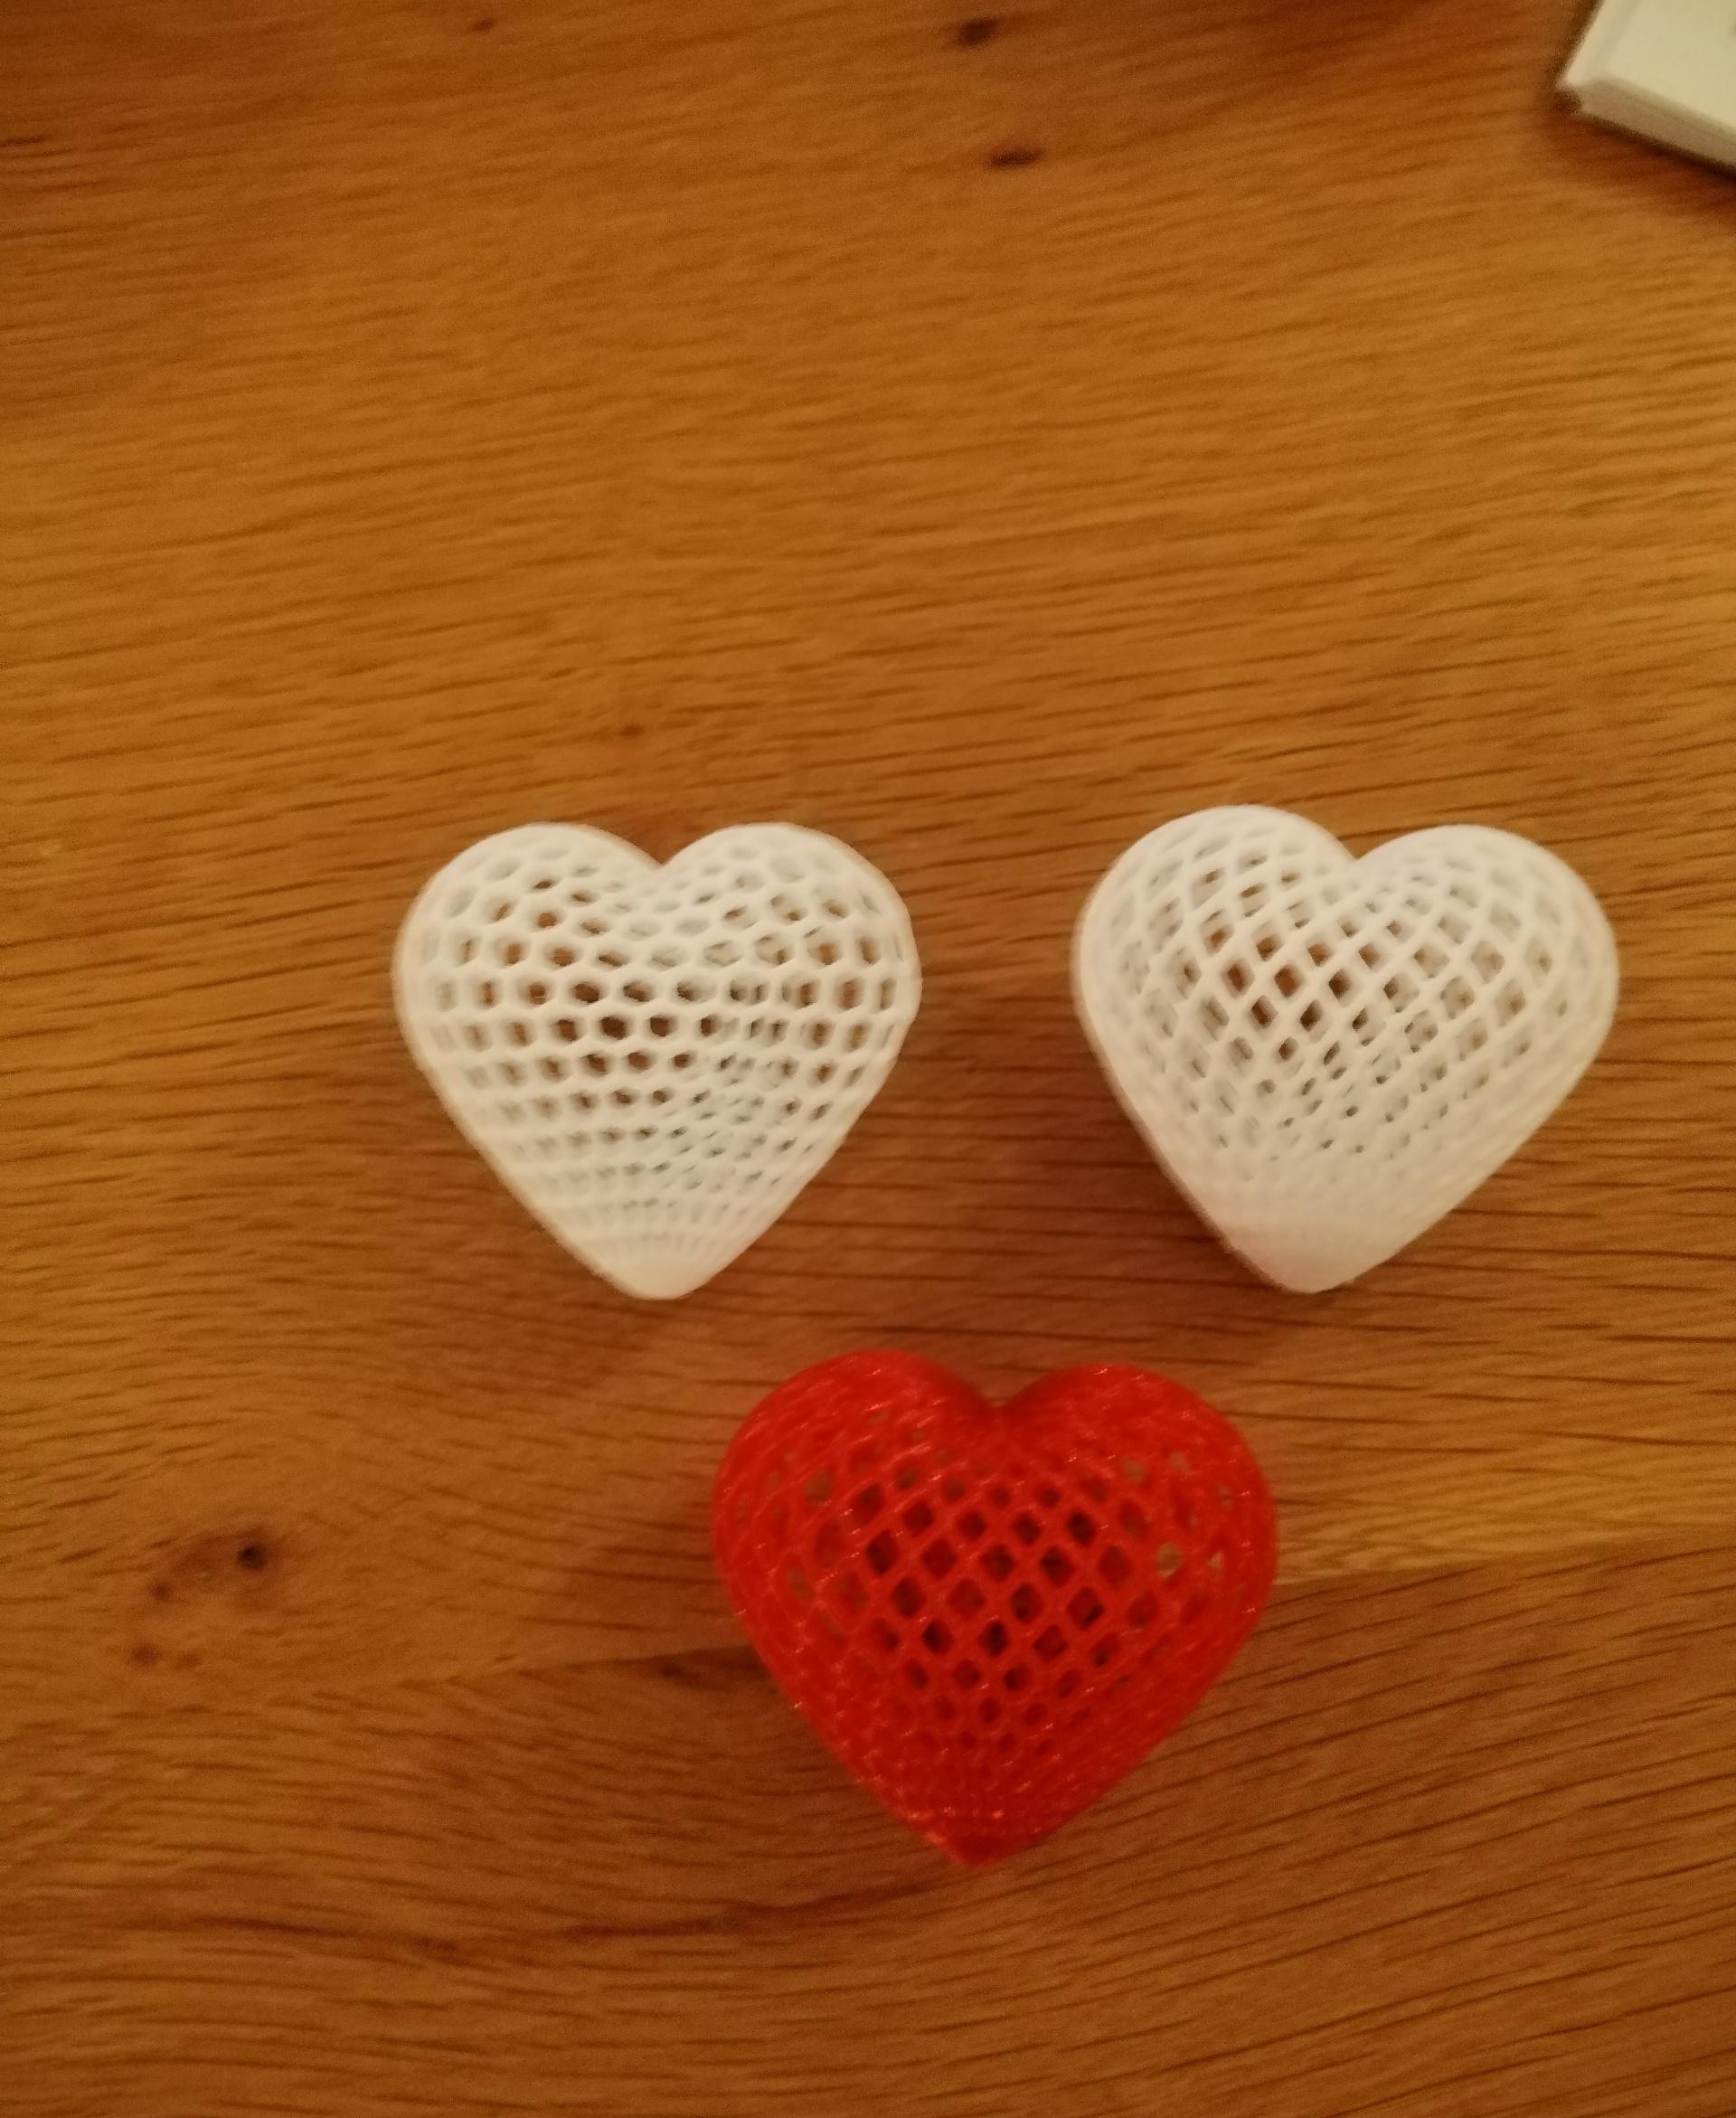 Lattice Hearts - Printed at 100% on an ender 3 v3 se. Only needs supports round the bottom to hold it up. - 3d model